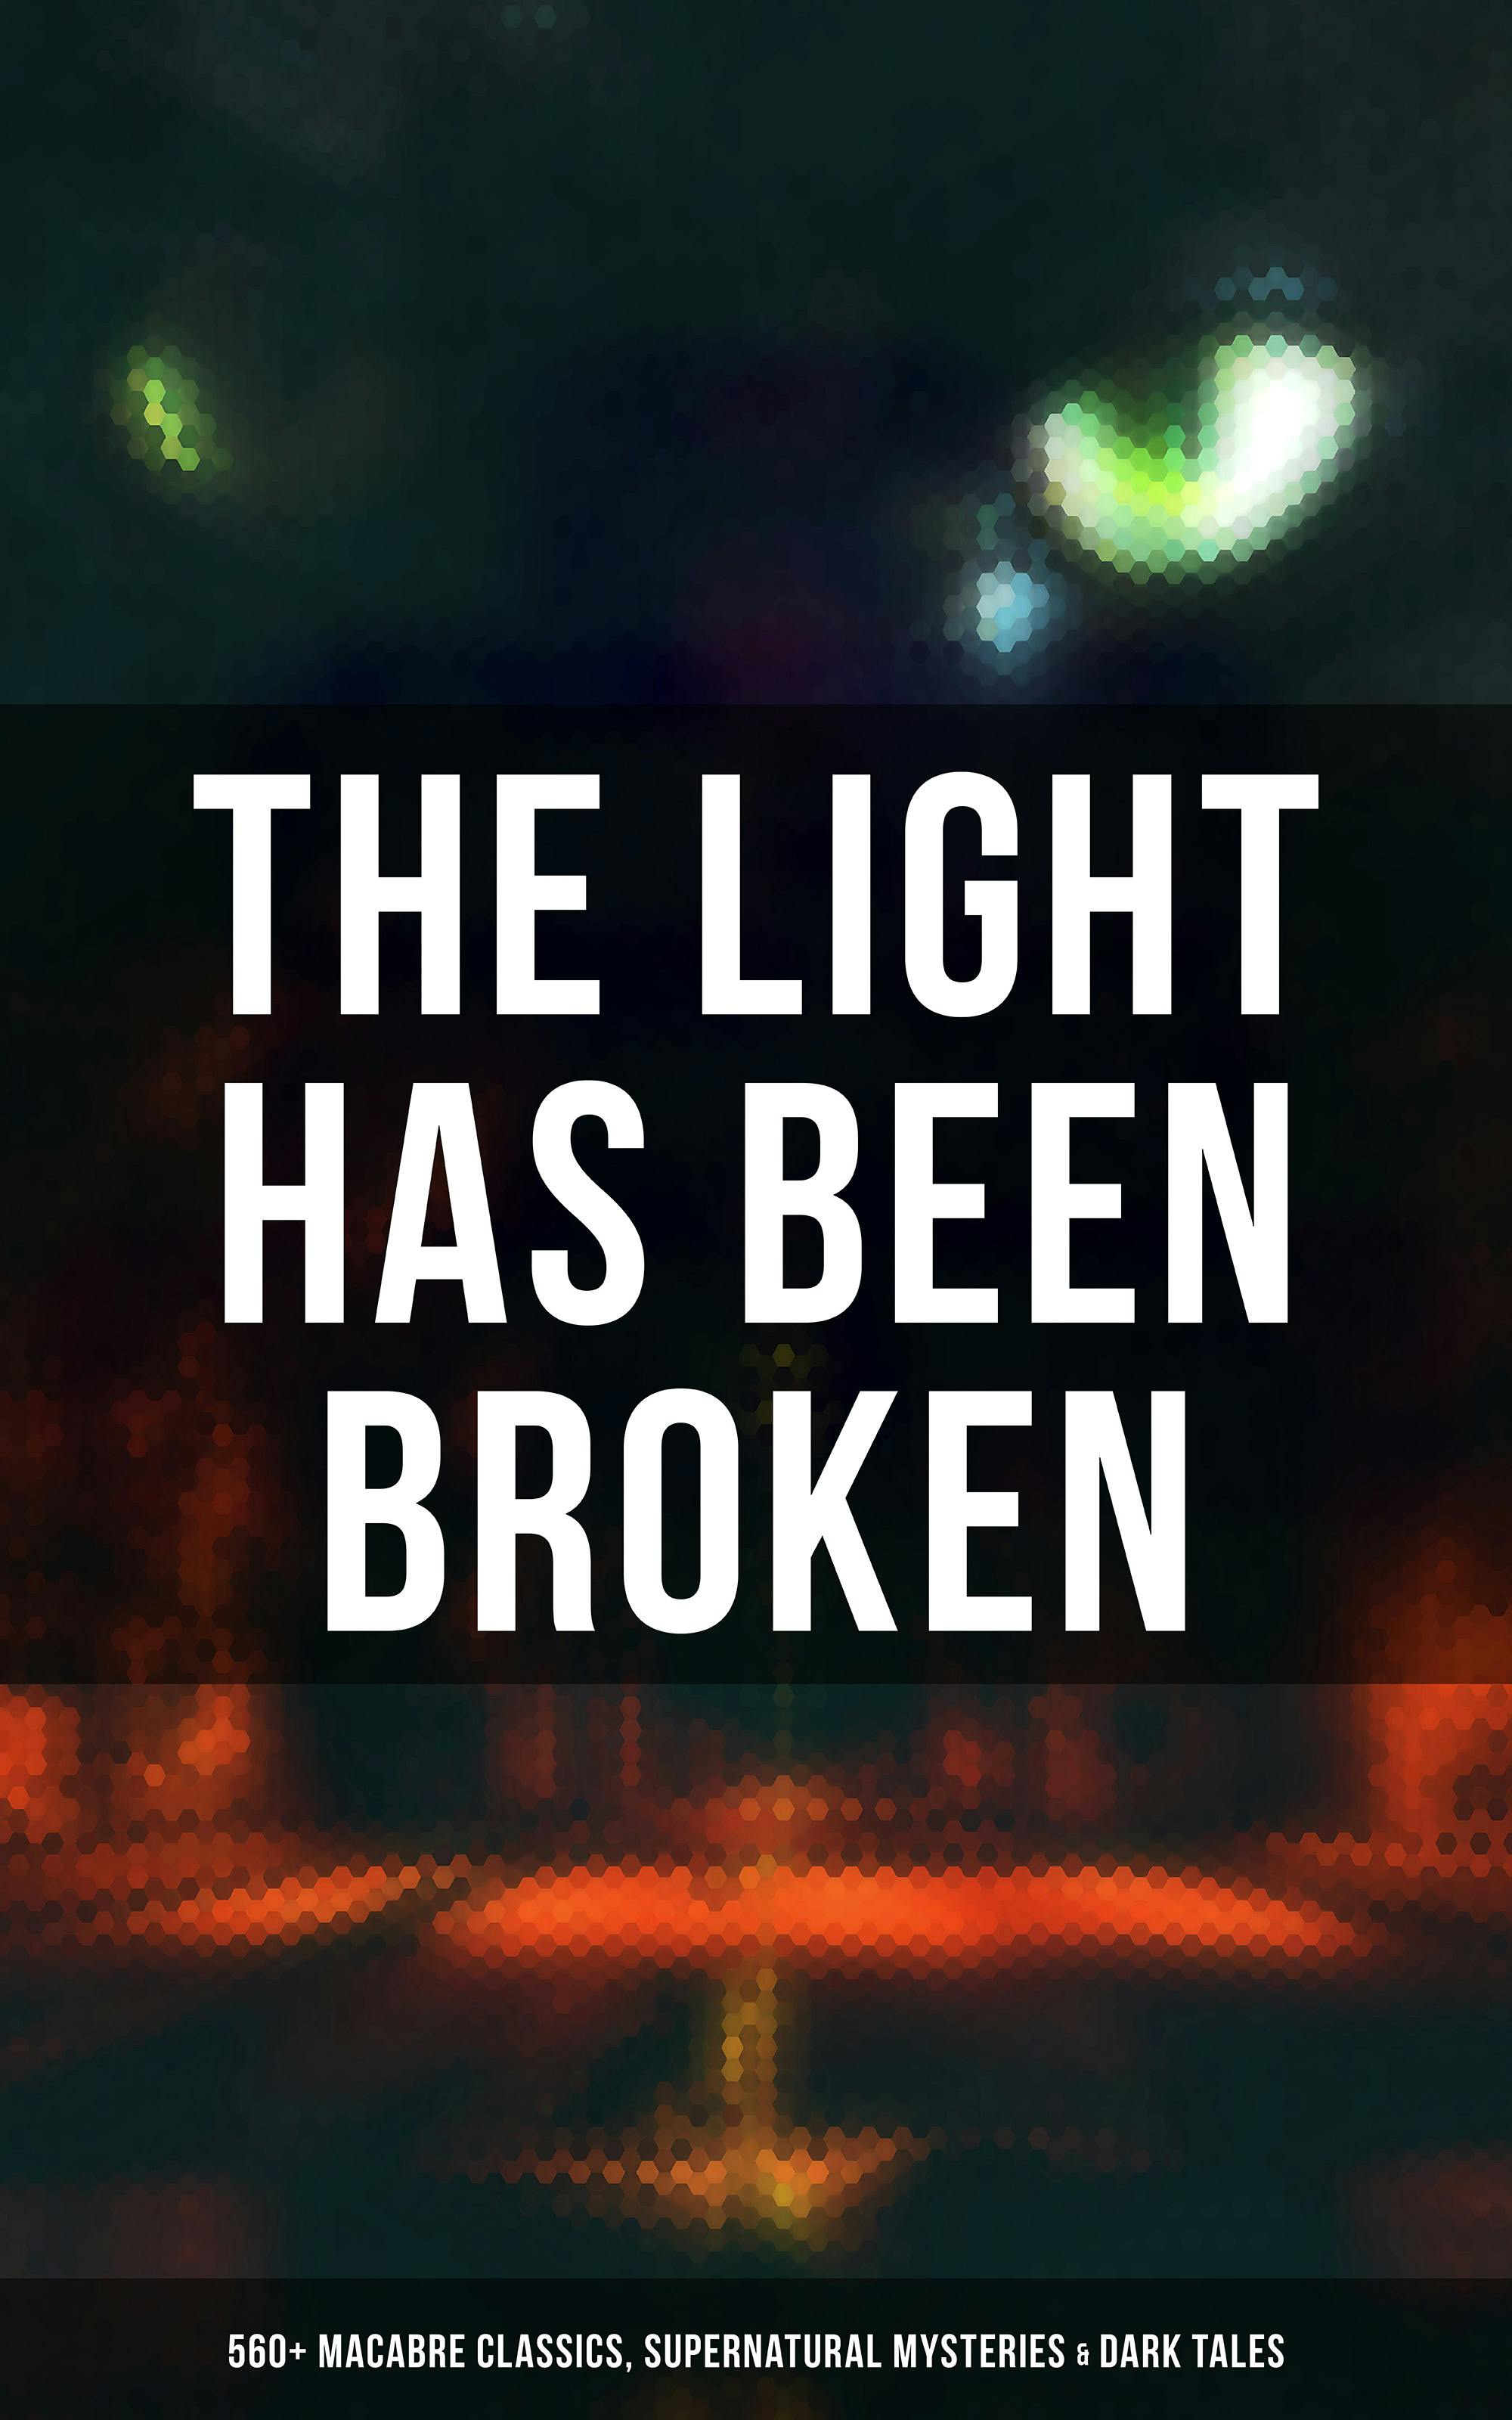 The Light Has Been Broken: 560+ Macabre Classics, Supernatural Mysteries & Dark Tales: The Mark of the Beast, The Ghost Pirates, The Vampyre, Sweeney Todd, The Sleepy Hollow… - undefined